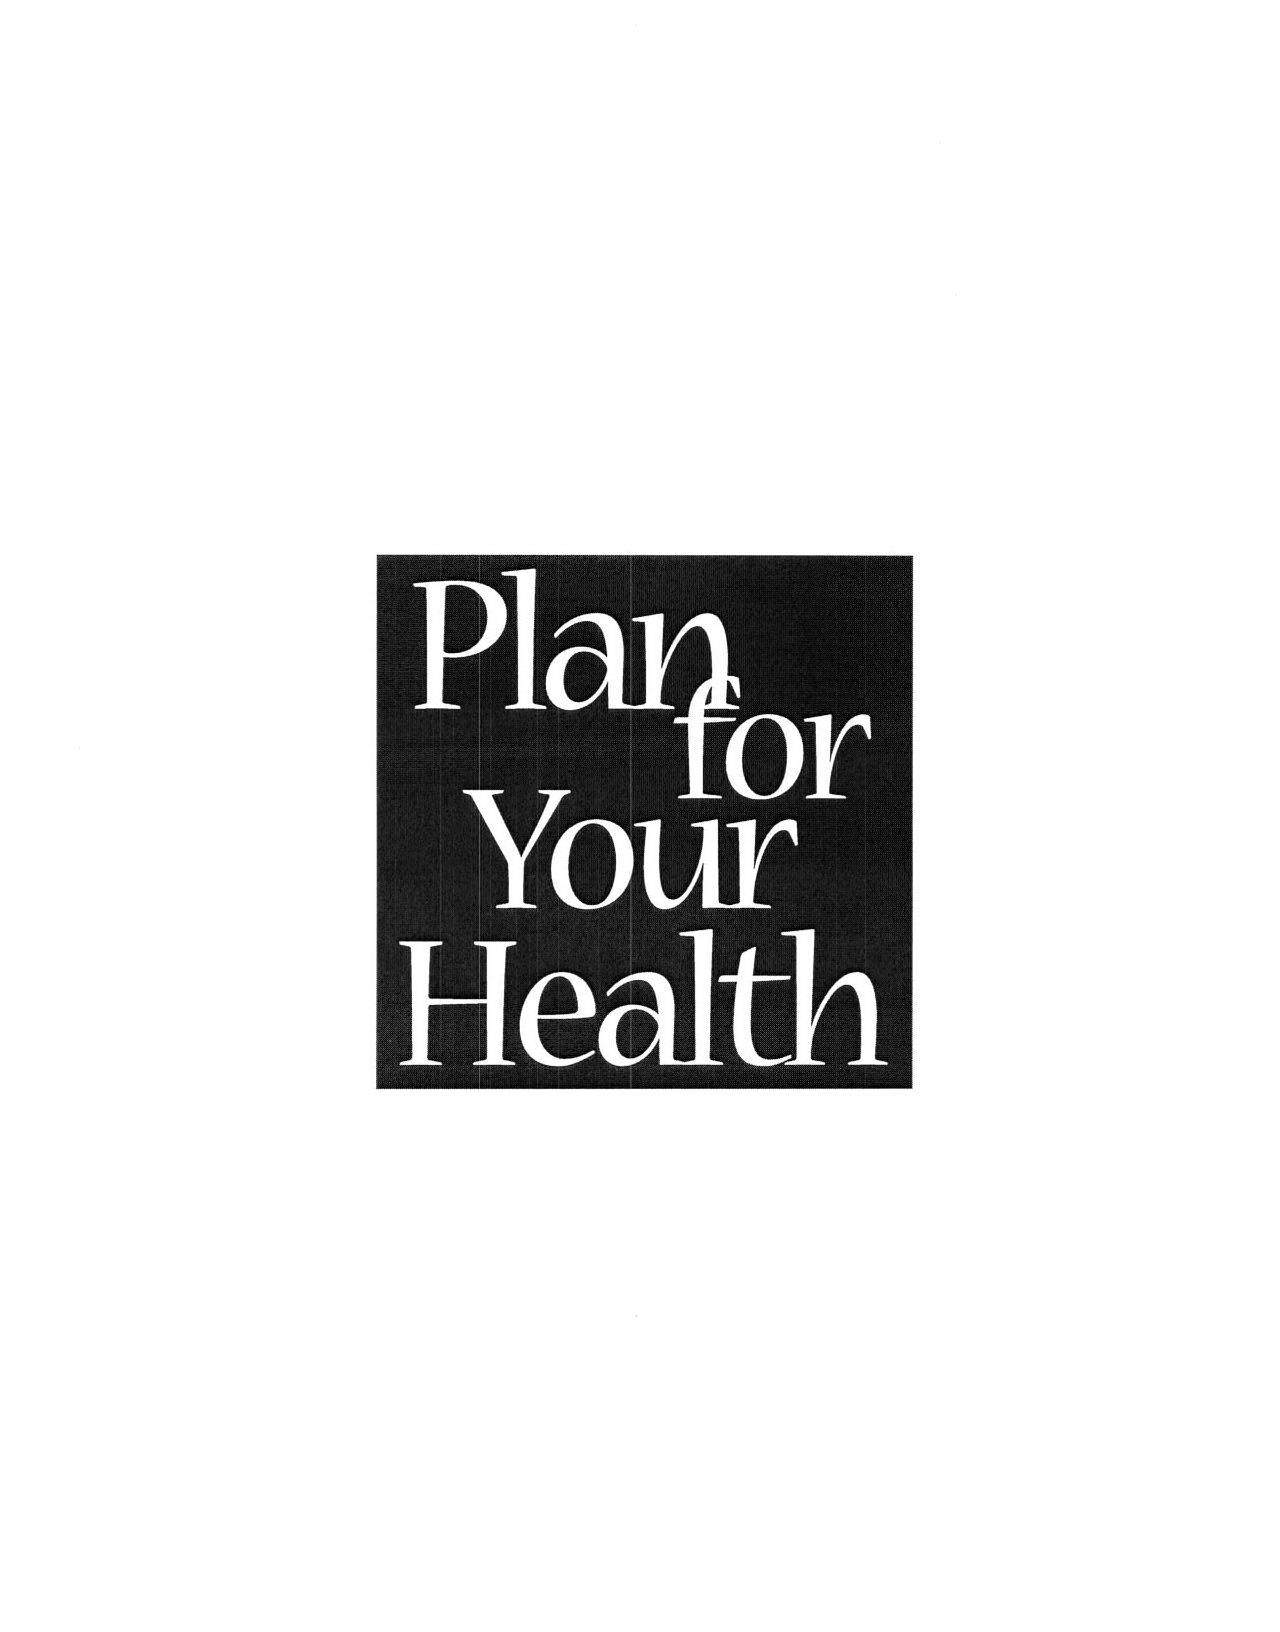  PLAN FOR YOUR HEALTH